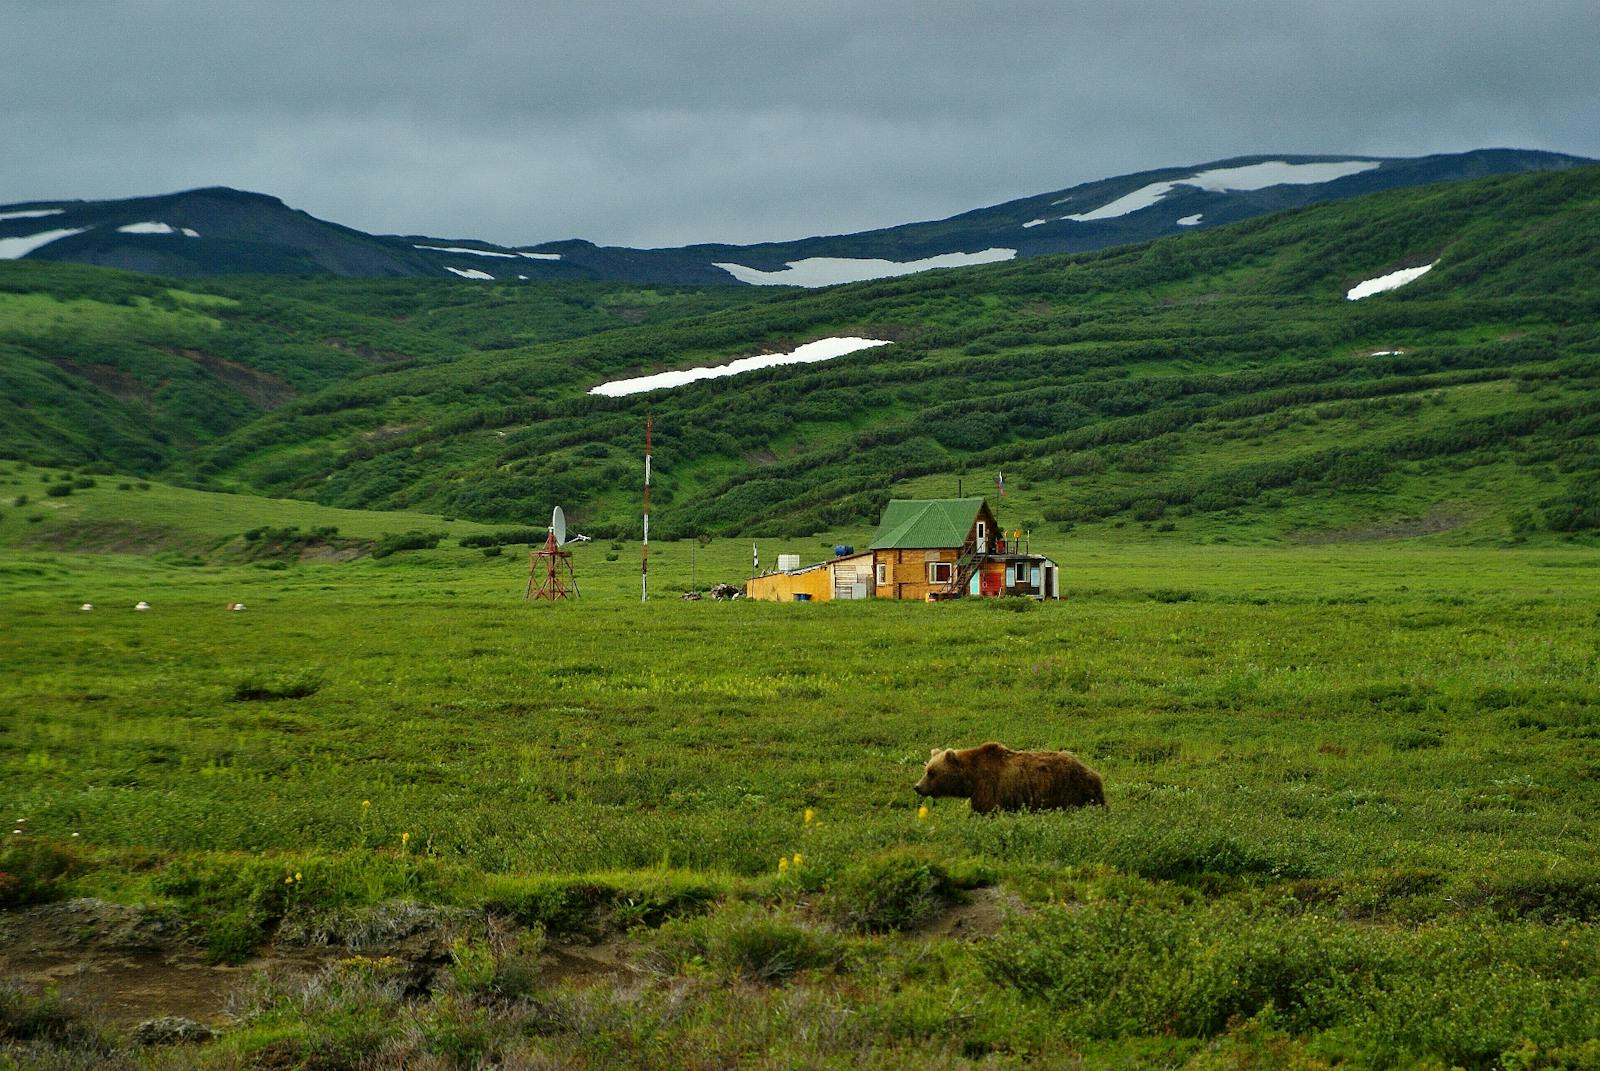 Kamchatka-Kurile Meadows and Sparse Forests